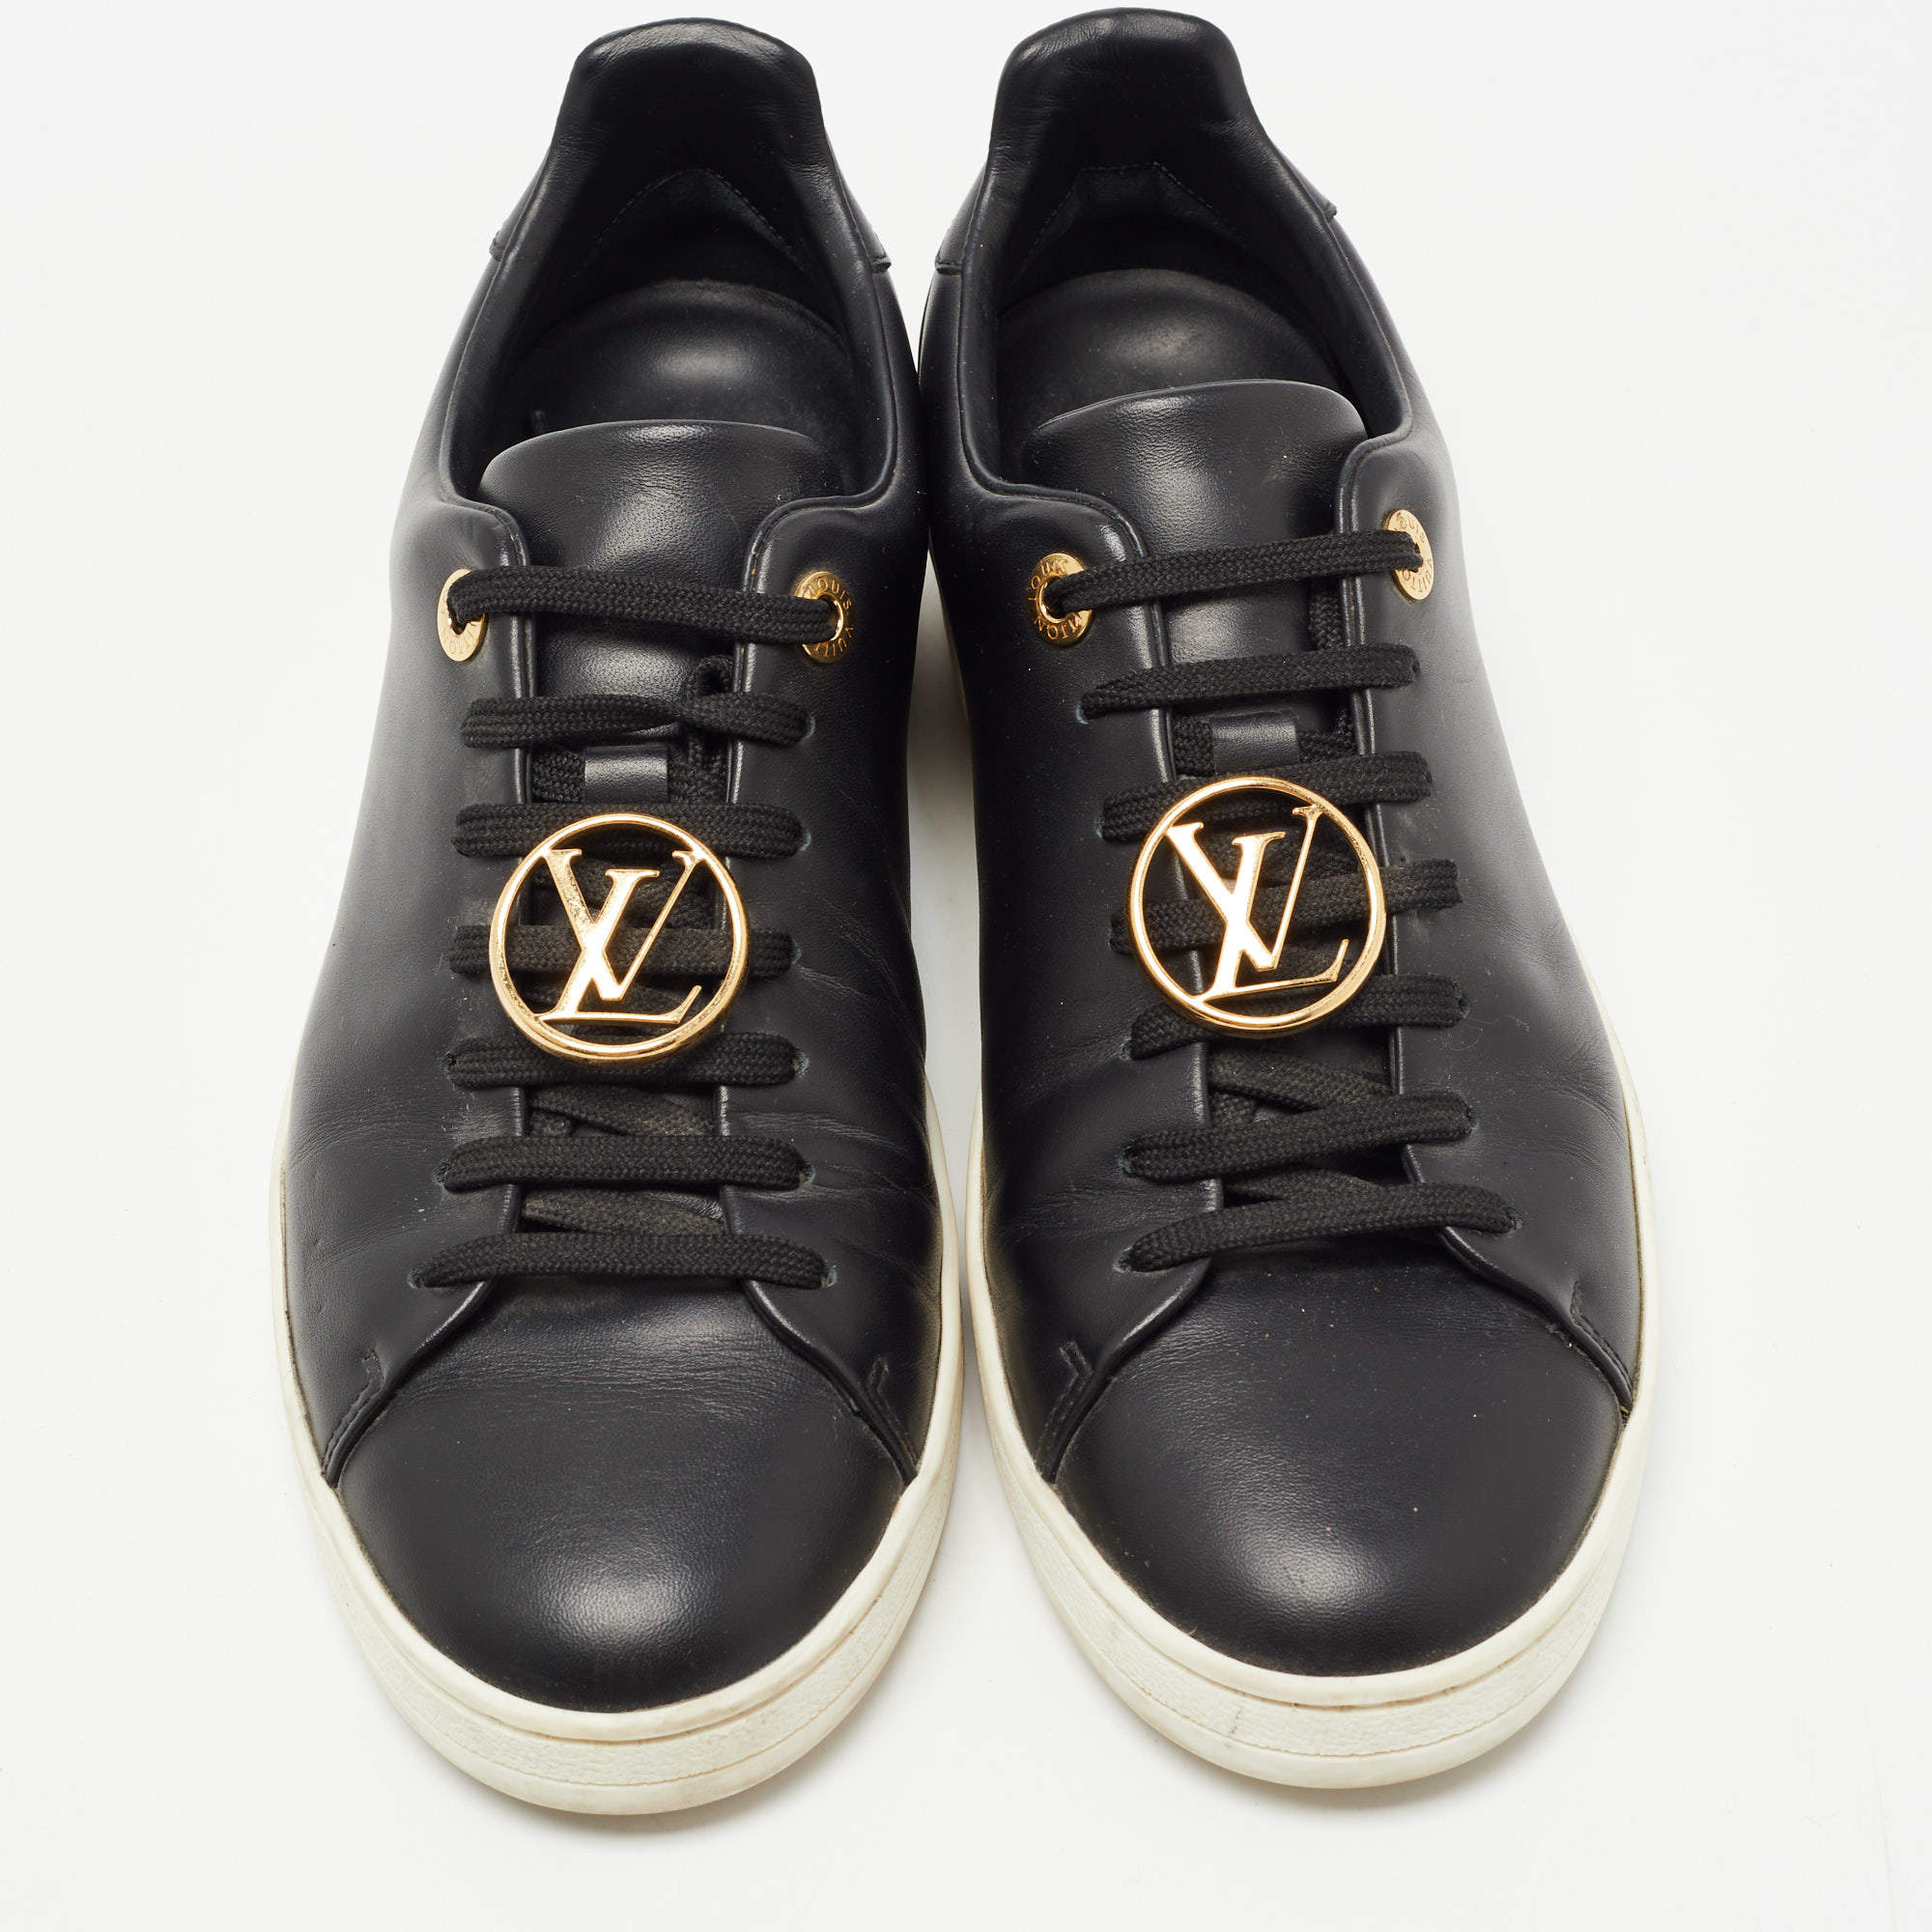 Frontrow leather trainers Louis Vuitton Metallic size 36 EU in Leather -  27548199